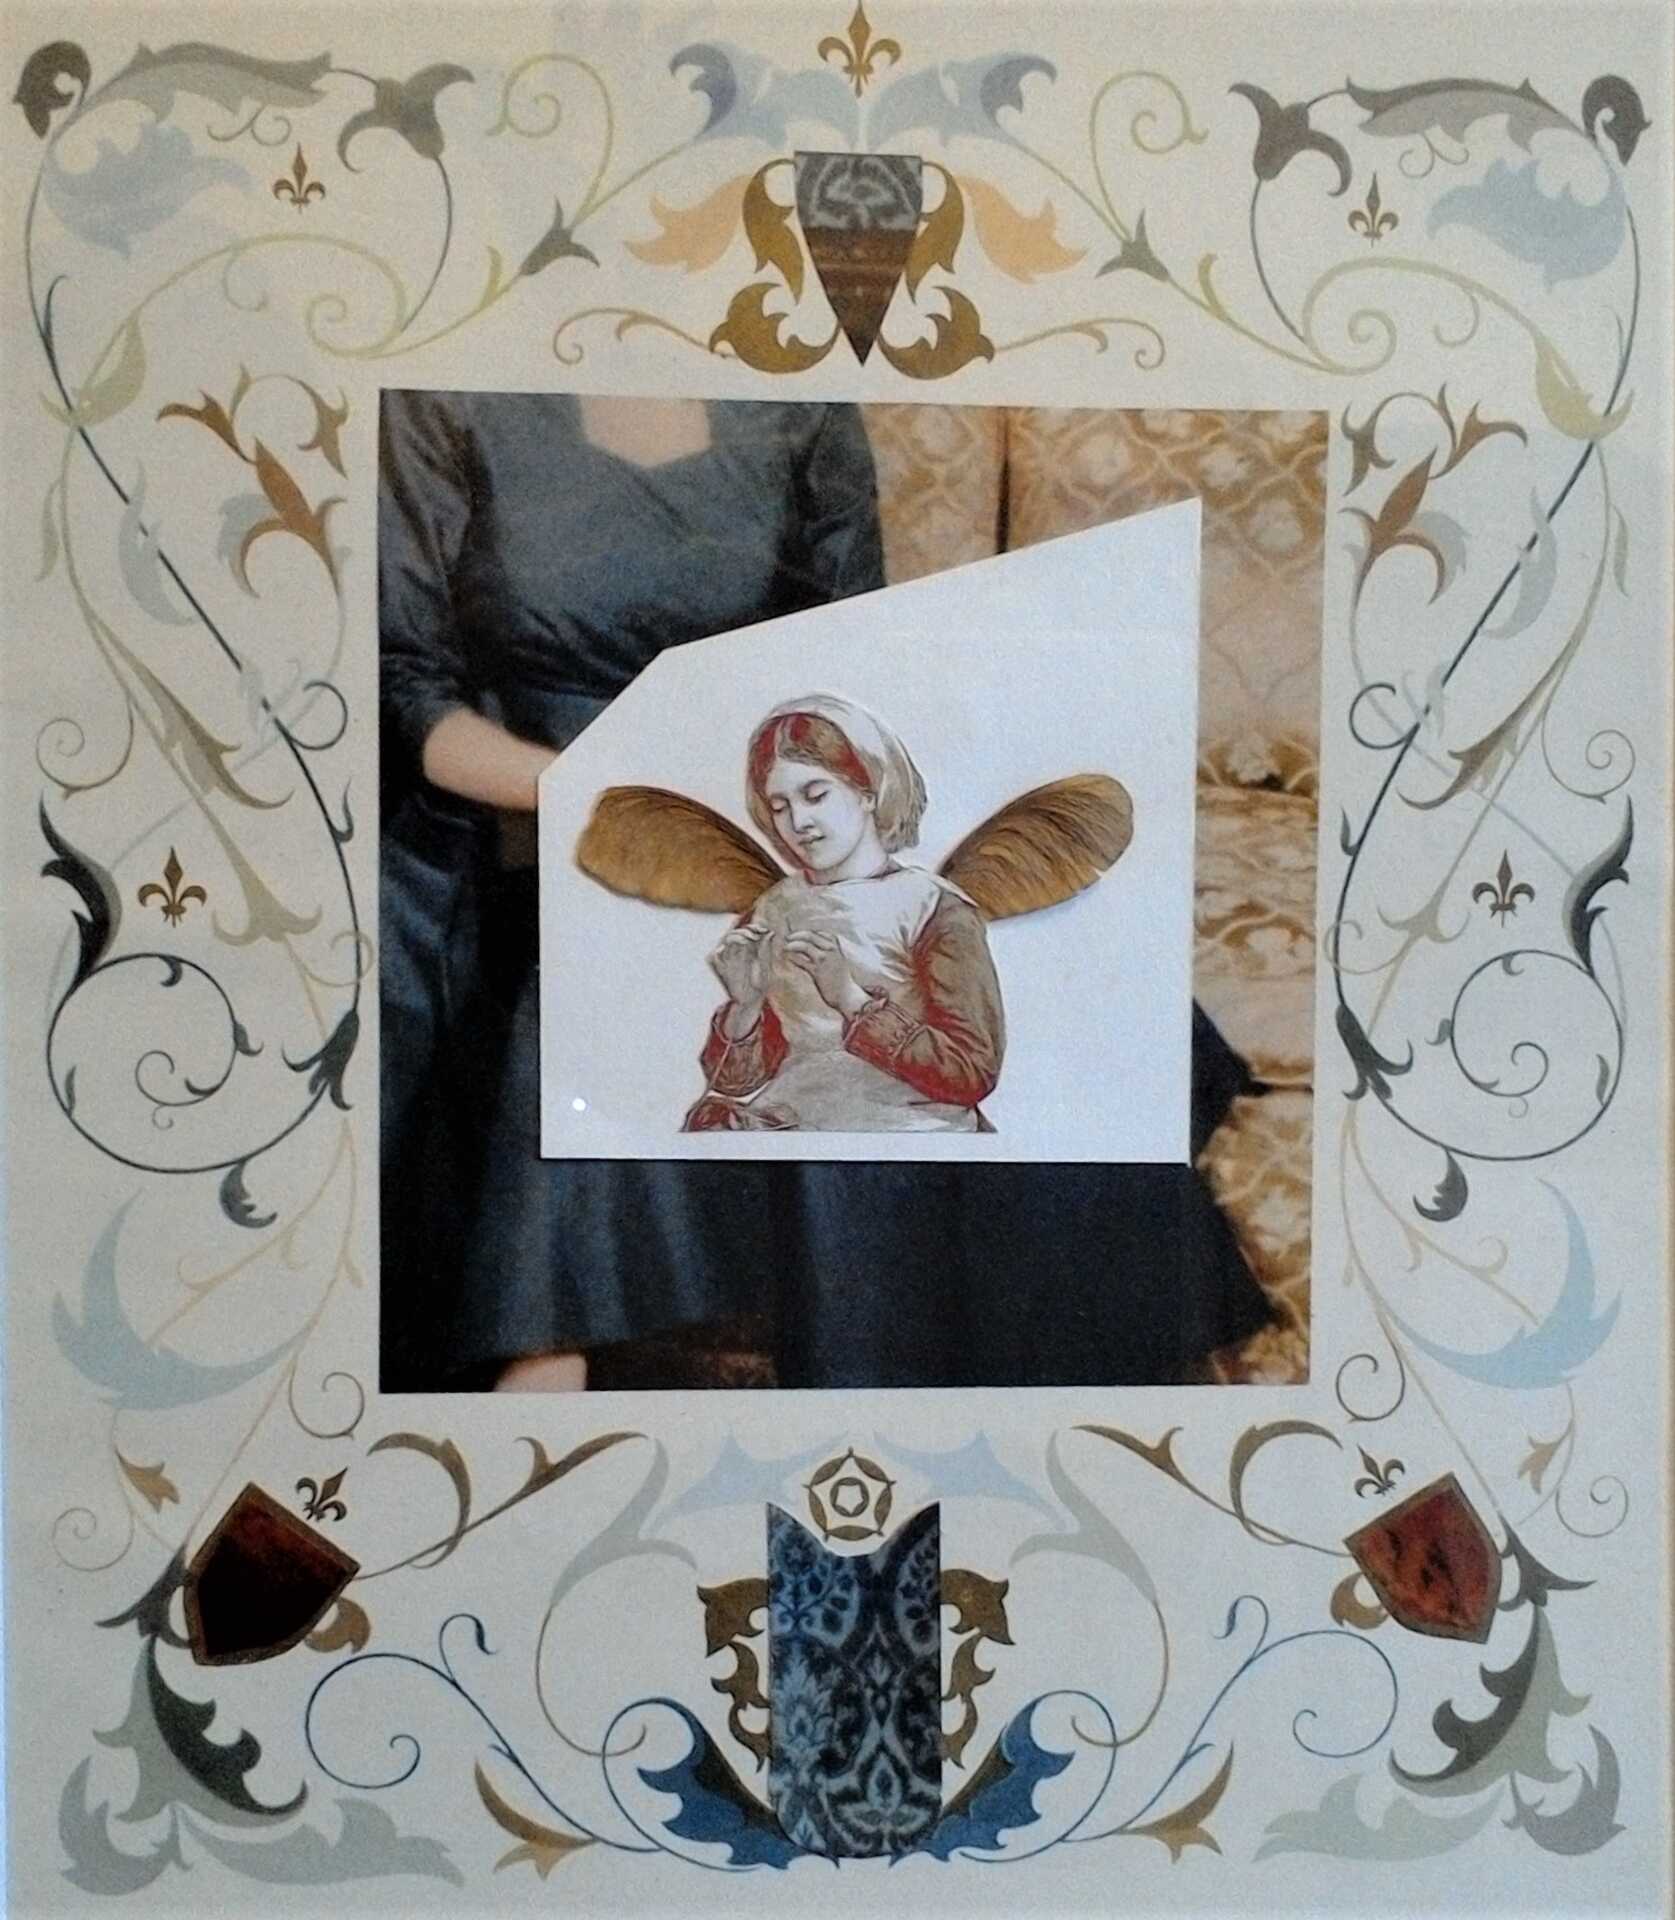 Collage work "Kitty" by Libby Bloxham. An elaborate ornamental border of swirling leaves and heraldric elements frames a square photograph of someone in an 80s era party dress. Layered over the photograph is a vintage sepia-toned illustration of a woman in archaic working clothes and a head scarf, threading a needle. From her back sprout textured wings that look like earthy-coloured leaves or petals.